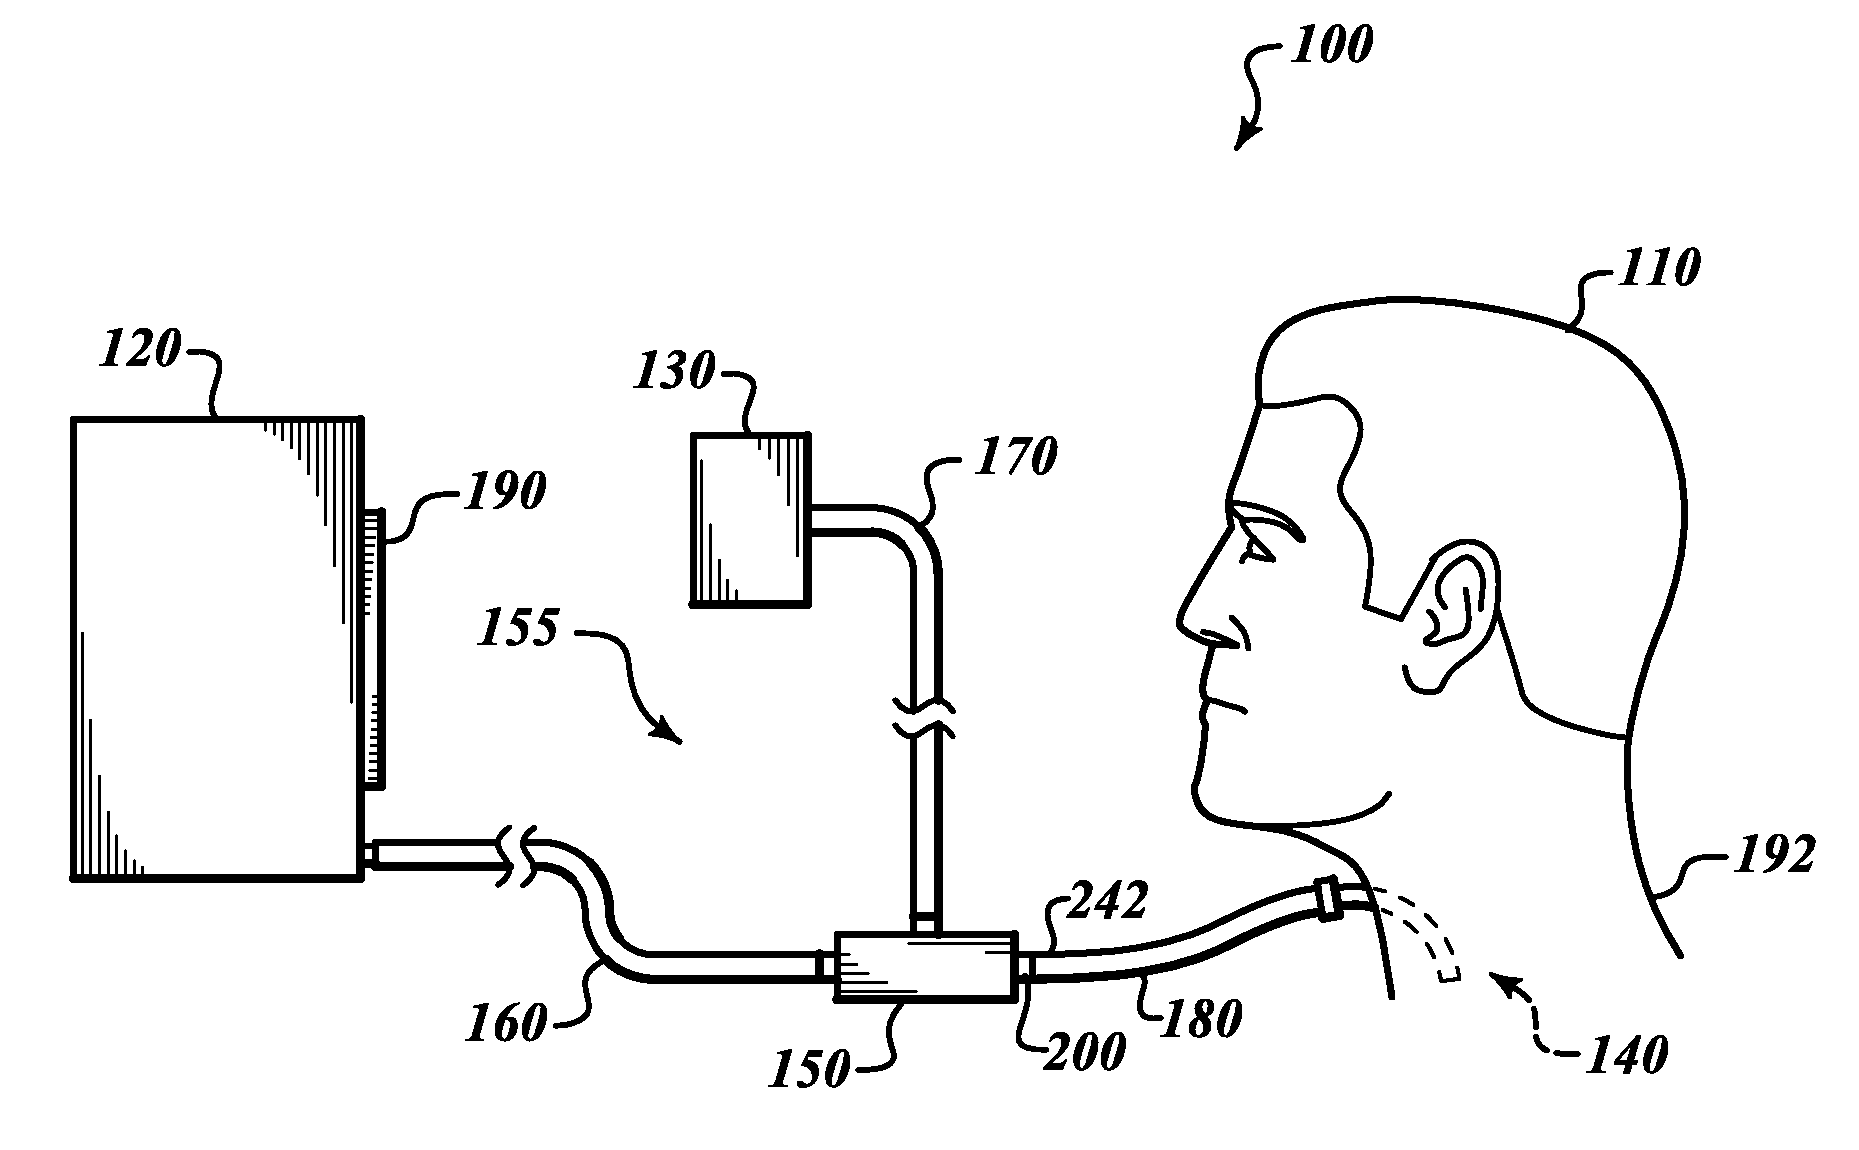 Flow control adapter for performing spirometry and pulmonary function testing